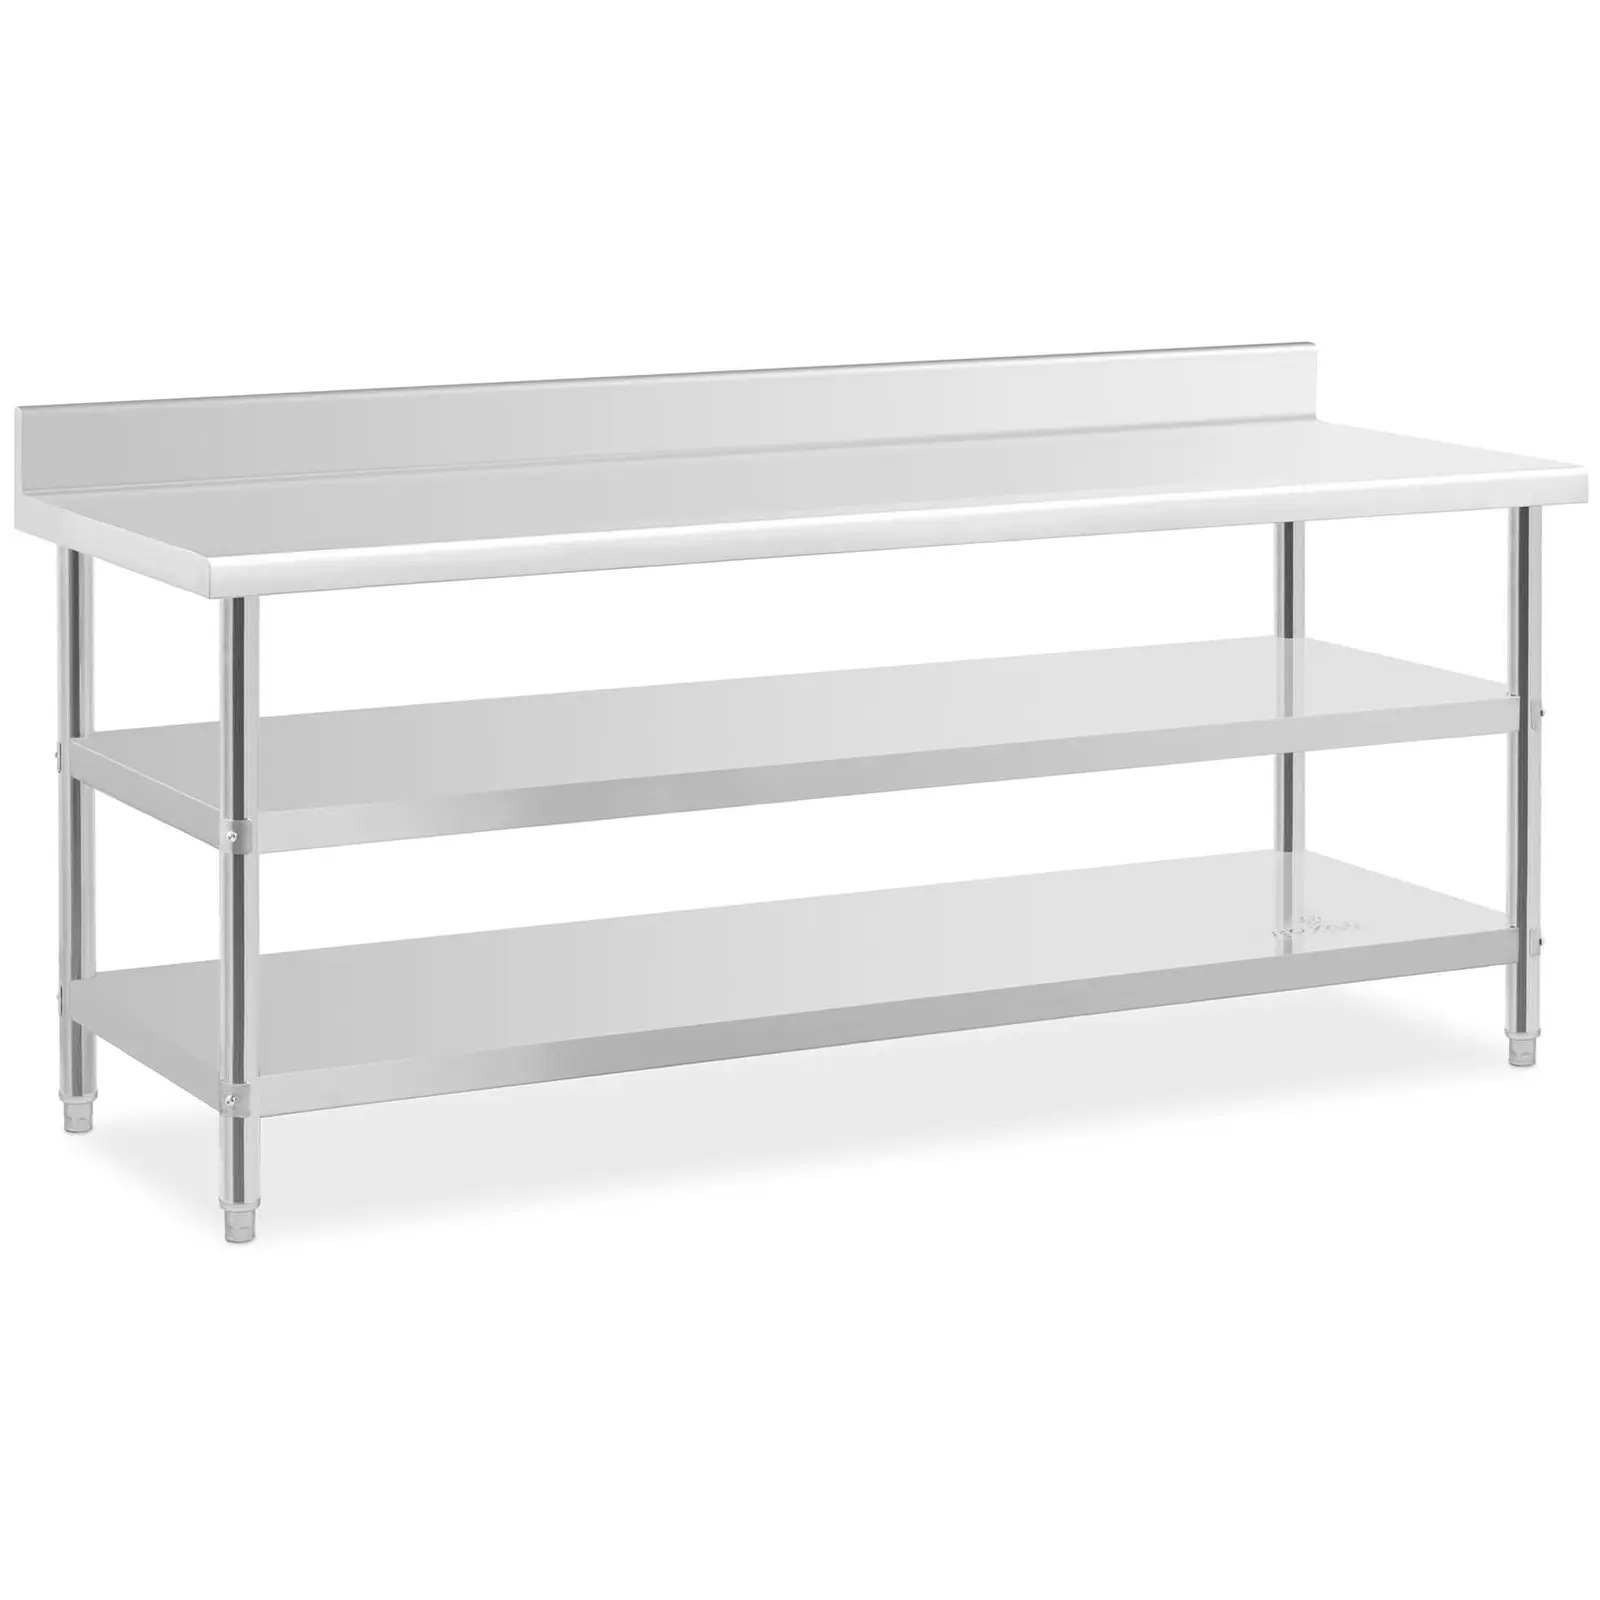 Factory second Stainless Steel Work Table with upstand - 200 x 70 x 16.5 cm - 235 kg - 2 shelves - Royal Catering